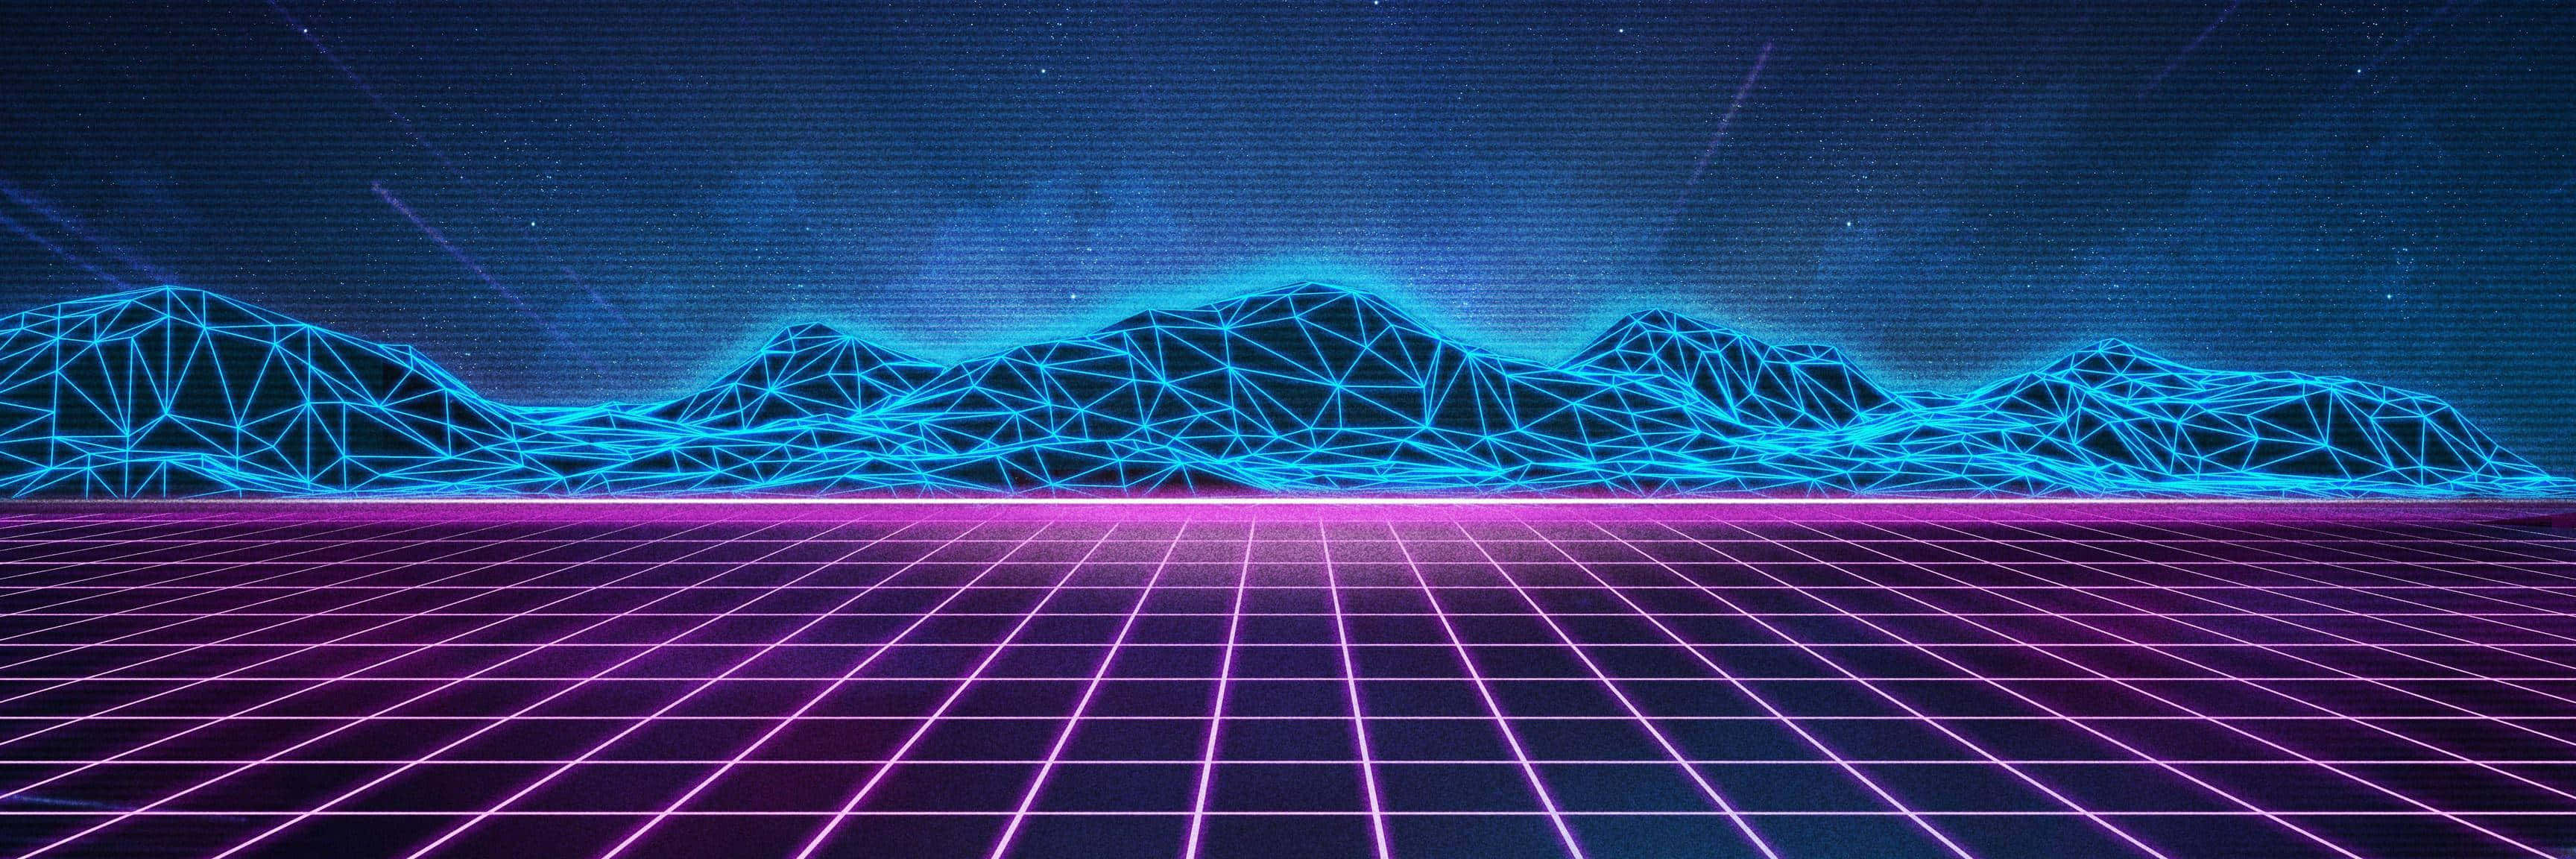 Step back into the past with this 80s Retro style background.